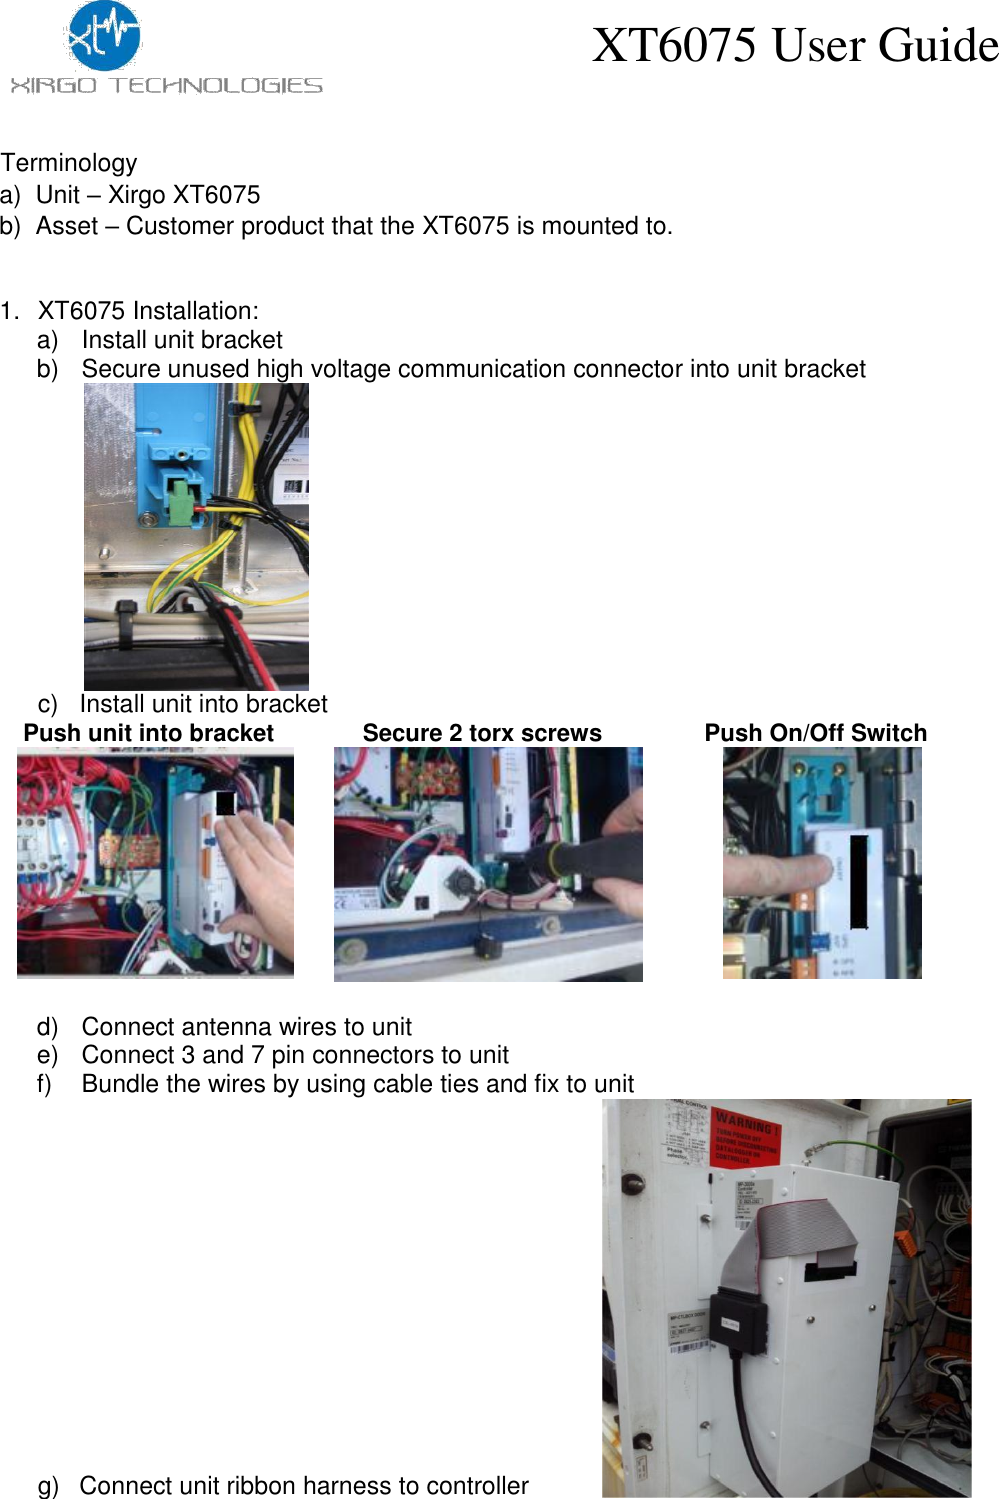 XT6075 User Guide    Terminology  a)  Unit – Xirgo XT6075  b)  Asset – Customer product that the XT6075 is mounted to.   1.  XT6075 Installation: a)  Install unit bracket b)  Secure unused high voltage communication connector into unit bracket                c)  Install unit into bracket  Push unit into bracket   Secure 2 torx screws   Push On/Off Switch              d)  Connect antenna wires to unit e)  Connect 3 and 7 pin connectors to unit f)  Bundle the wires by using cable ties and fix to unit                   g)  Connect unit ribbon harness to controller 